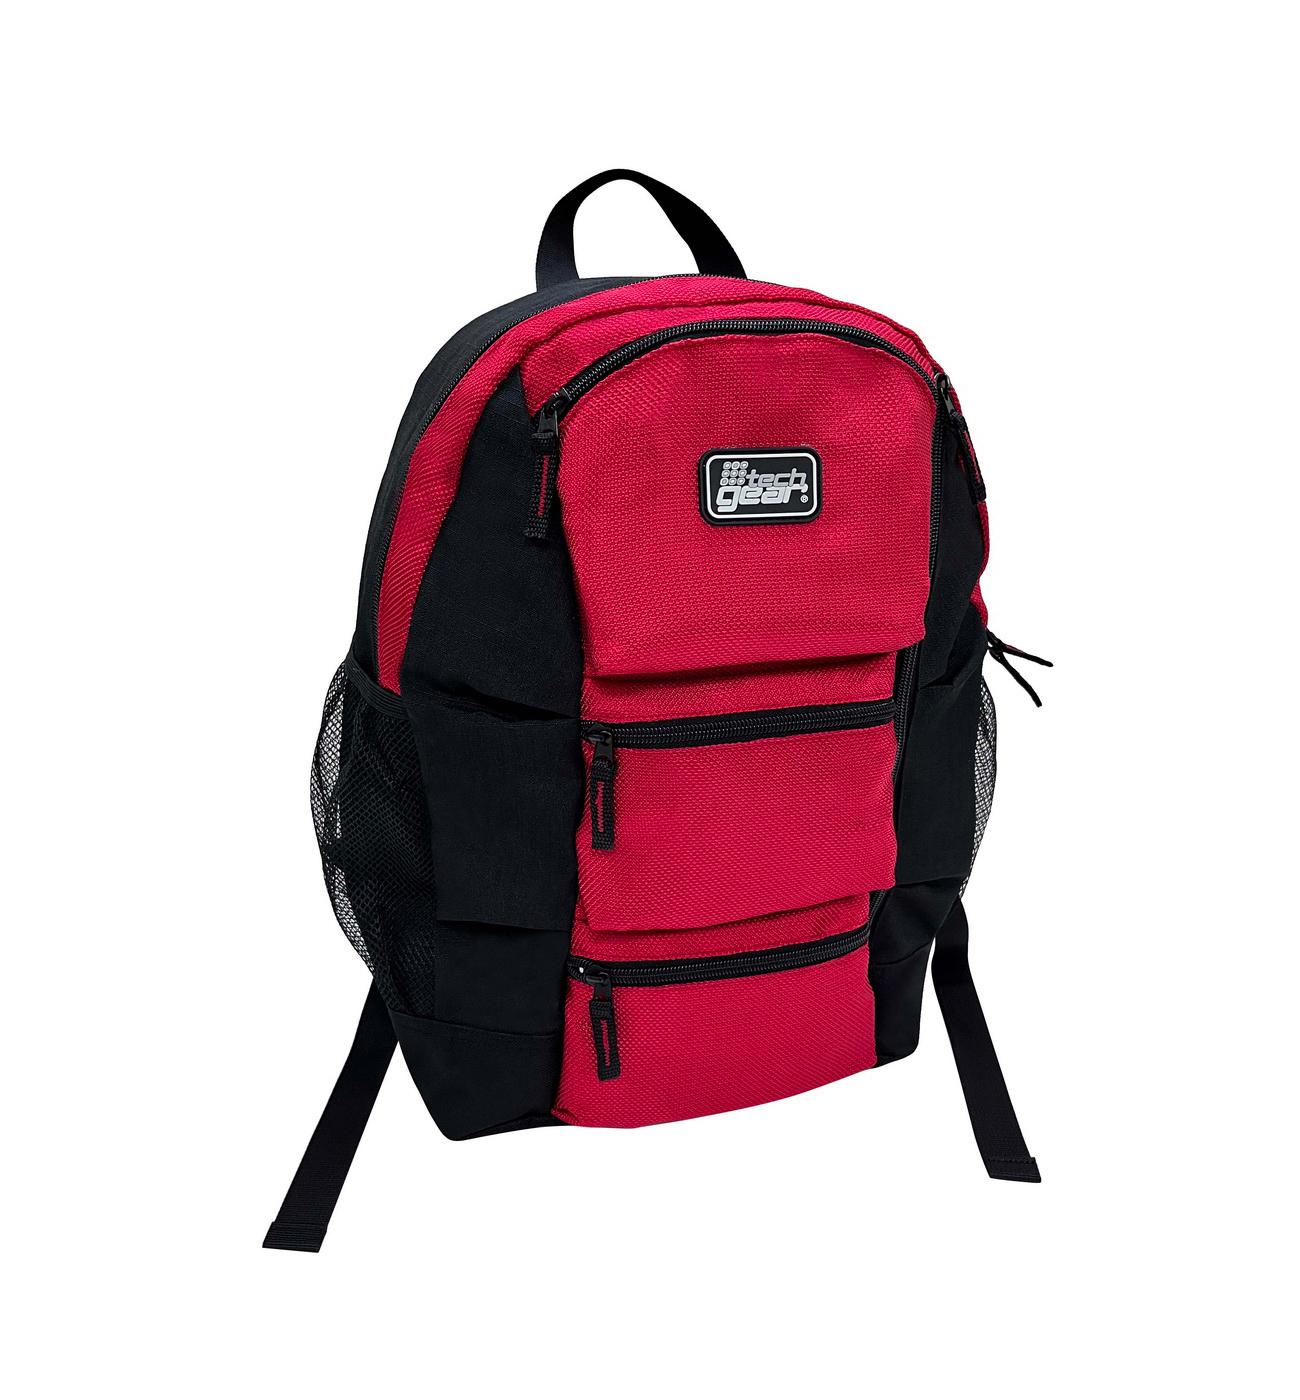 Tech Gear Downtown Backpack - Black & Red; image 2 of 3